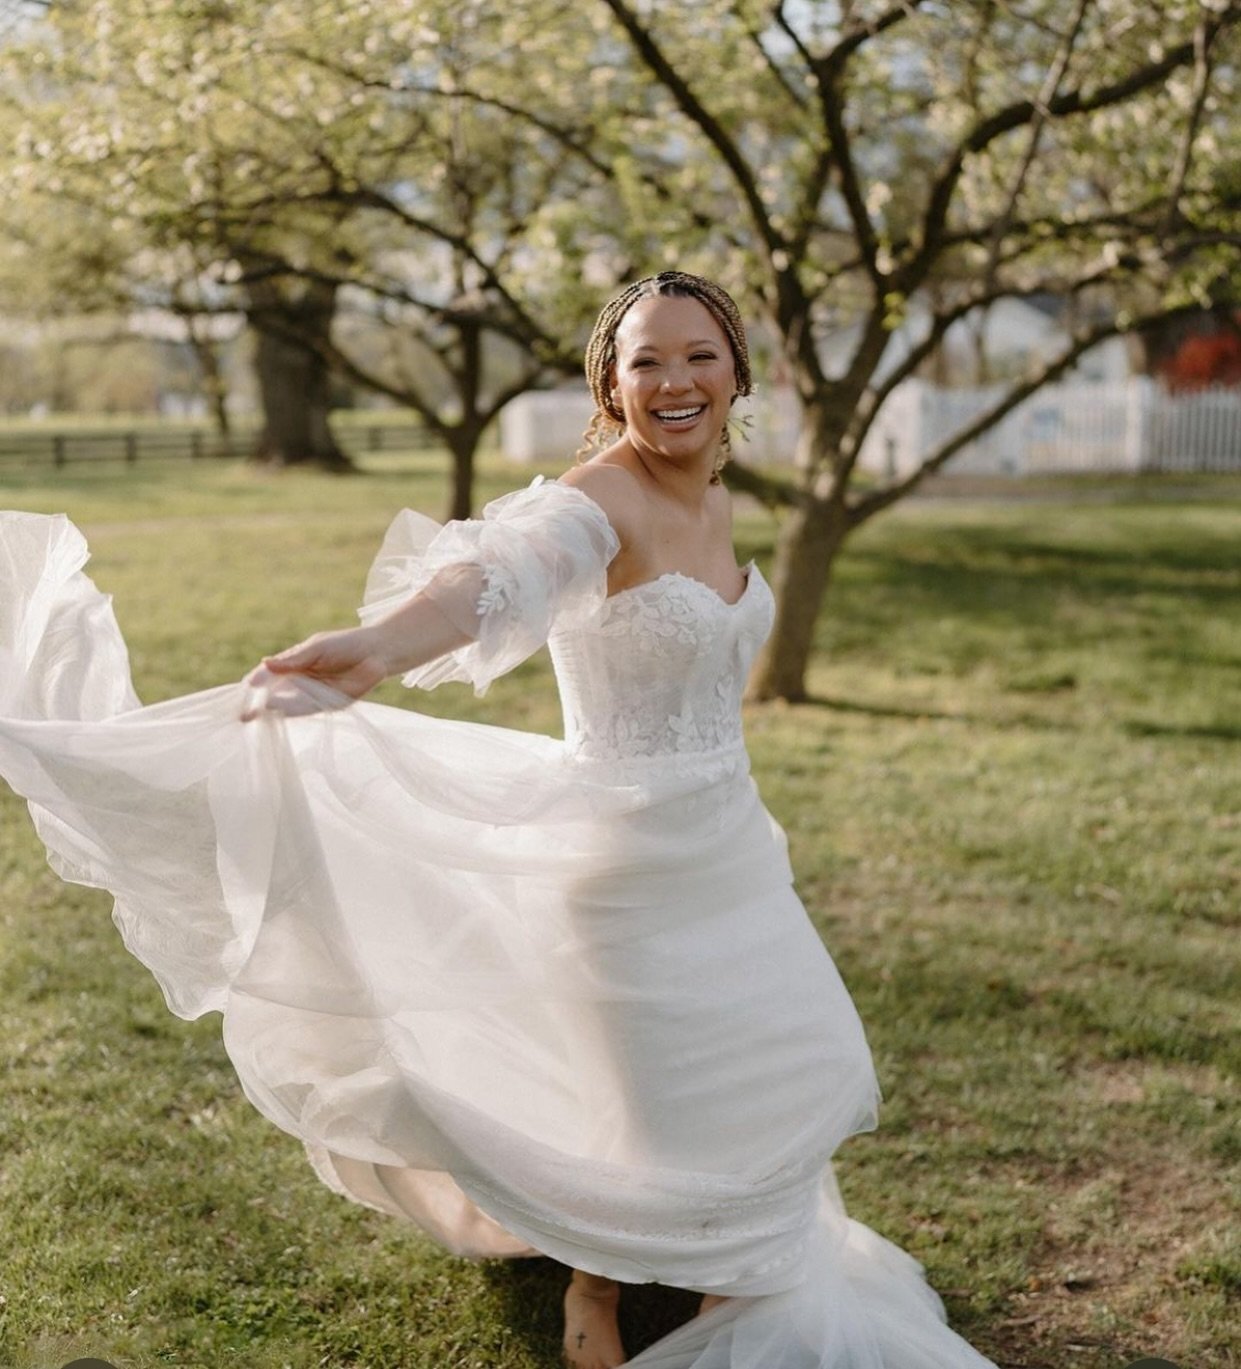 Sometimes the best answer is to just twirl in a beautiful gown with a big smile on your face! I know it&rsquo;s Monday but give it a try and see how you feel! It&rsquo;s frivolous and silly and impractical but I bet you smile and laugh, and feel happ